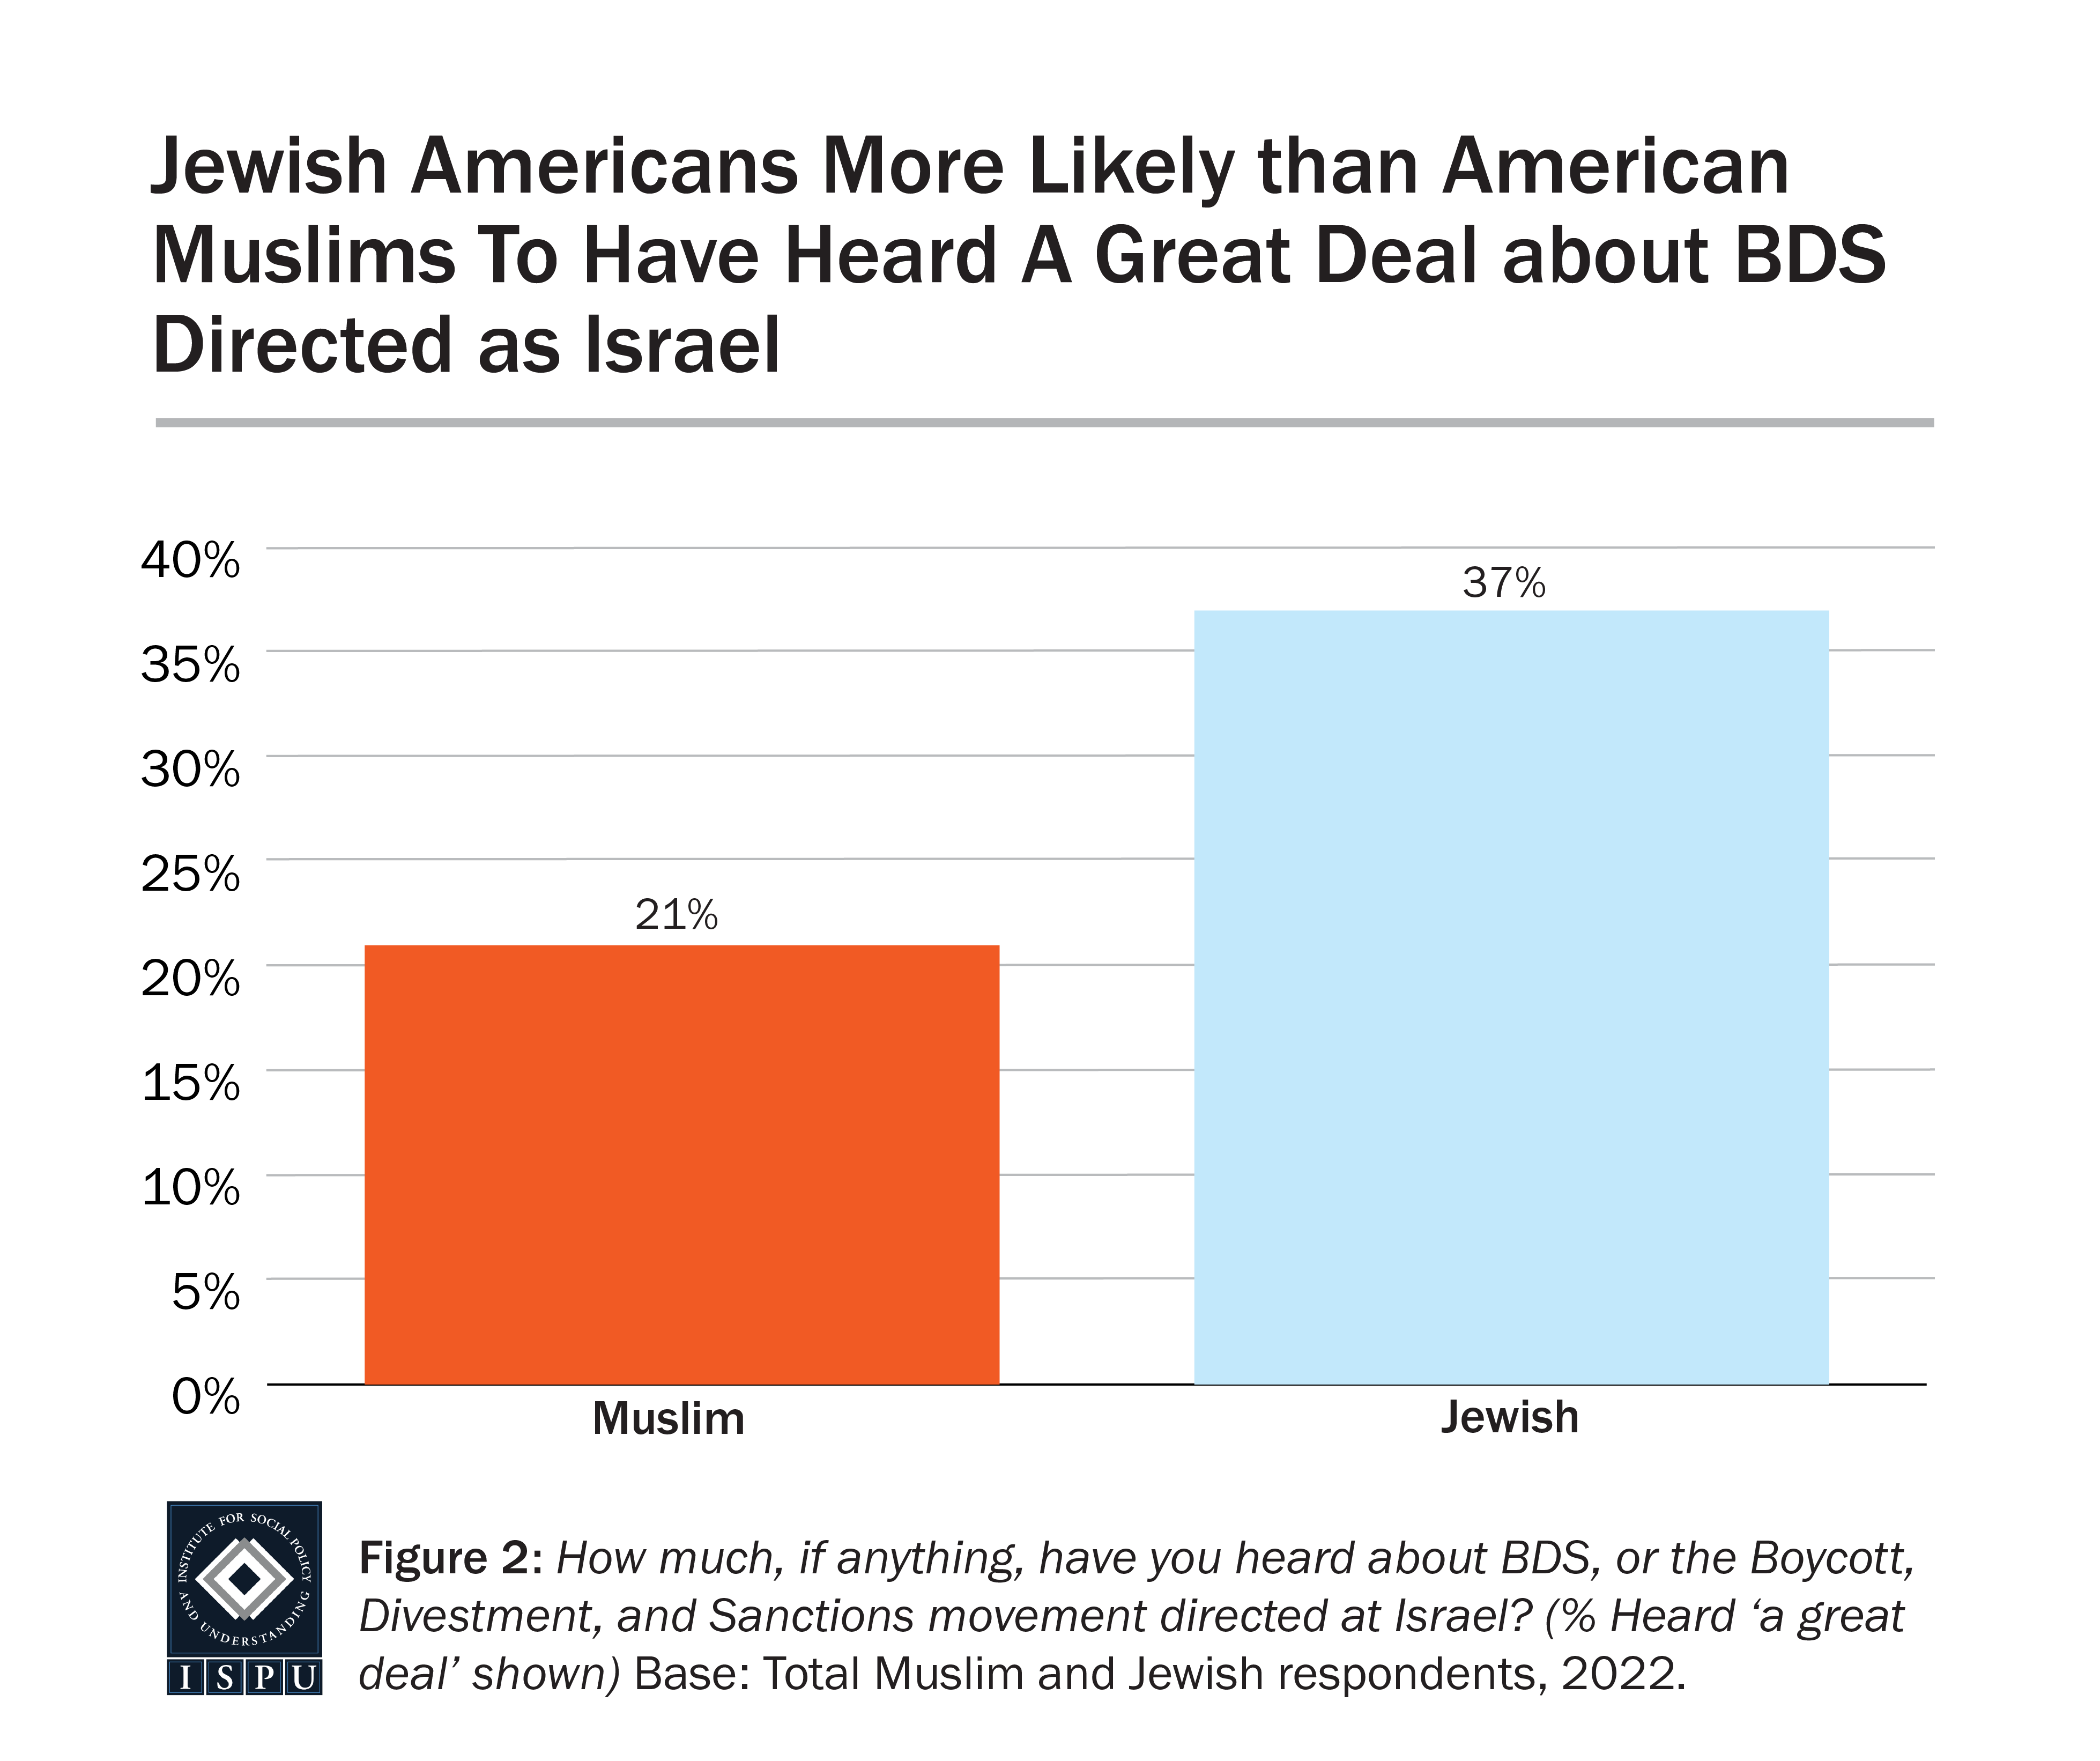 Graph displaying: A bar graph showing that Jewish Americans are more likely than American Muslims, to have heard a great deal about the boycott, divestment, and sanctions movement directed at Israel.